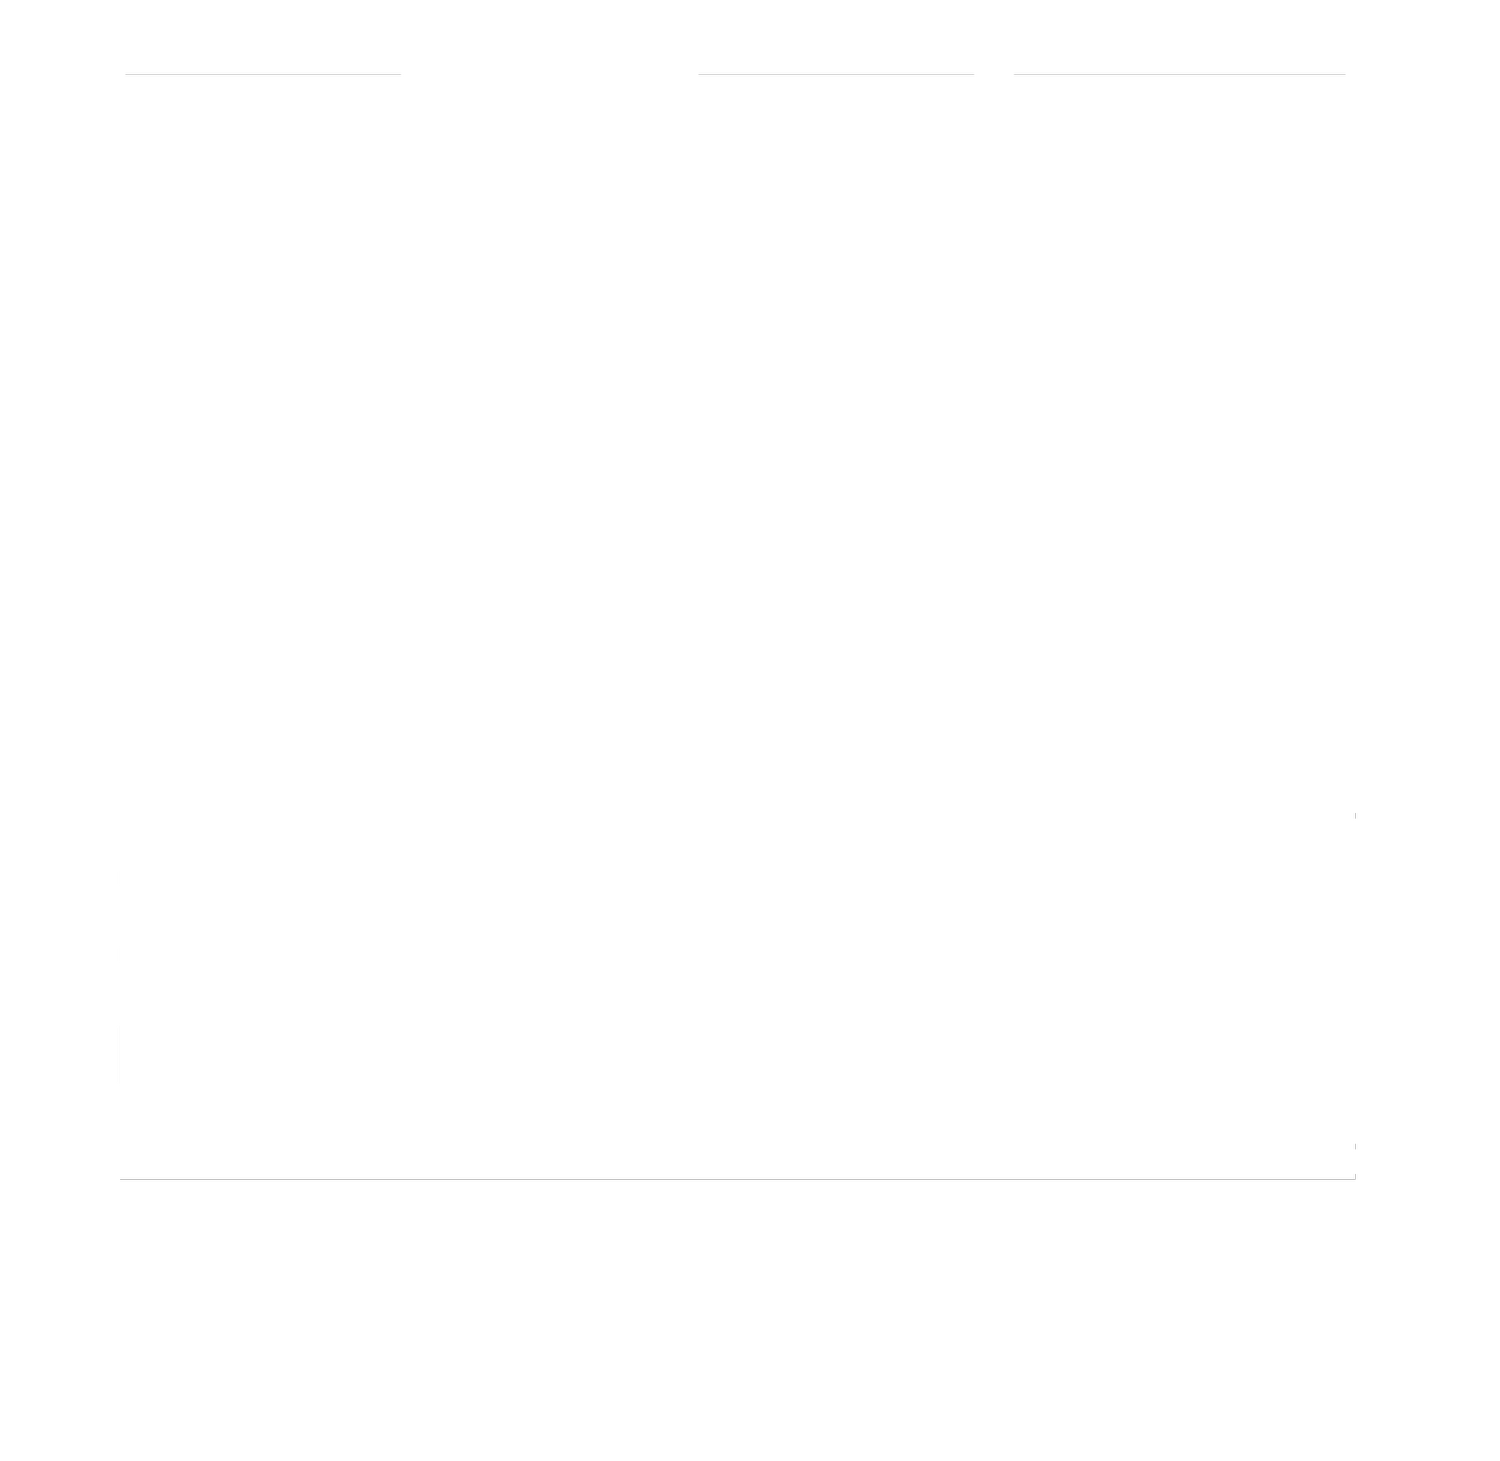 LiaKate Photography &amp; Graphic Design